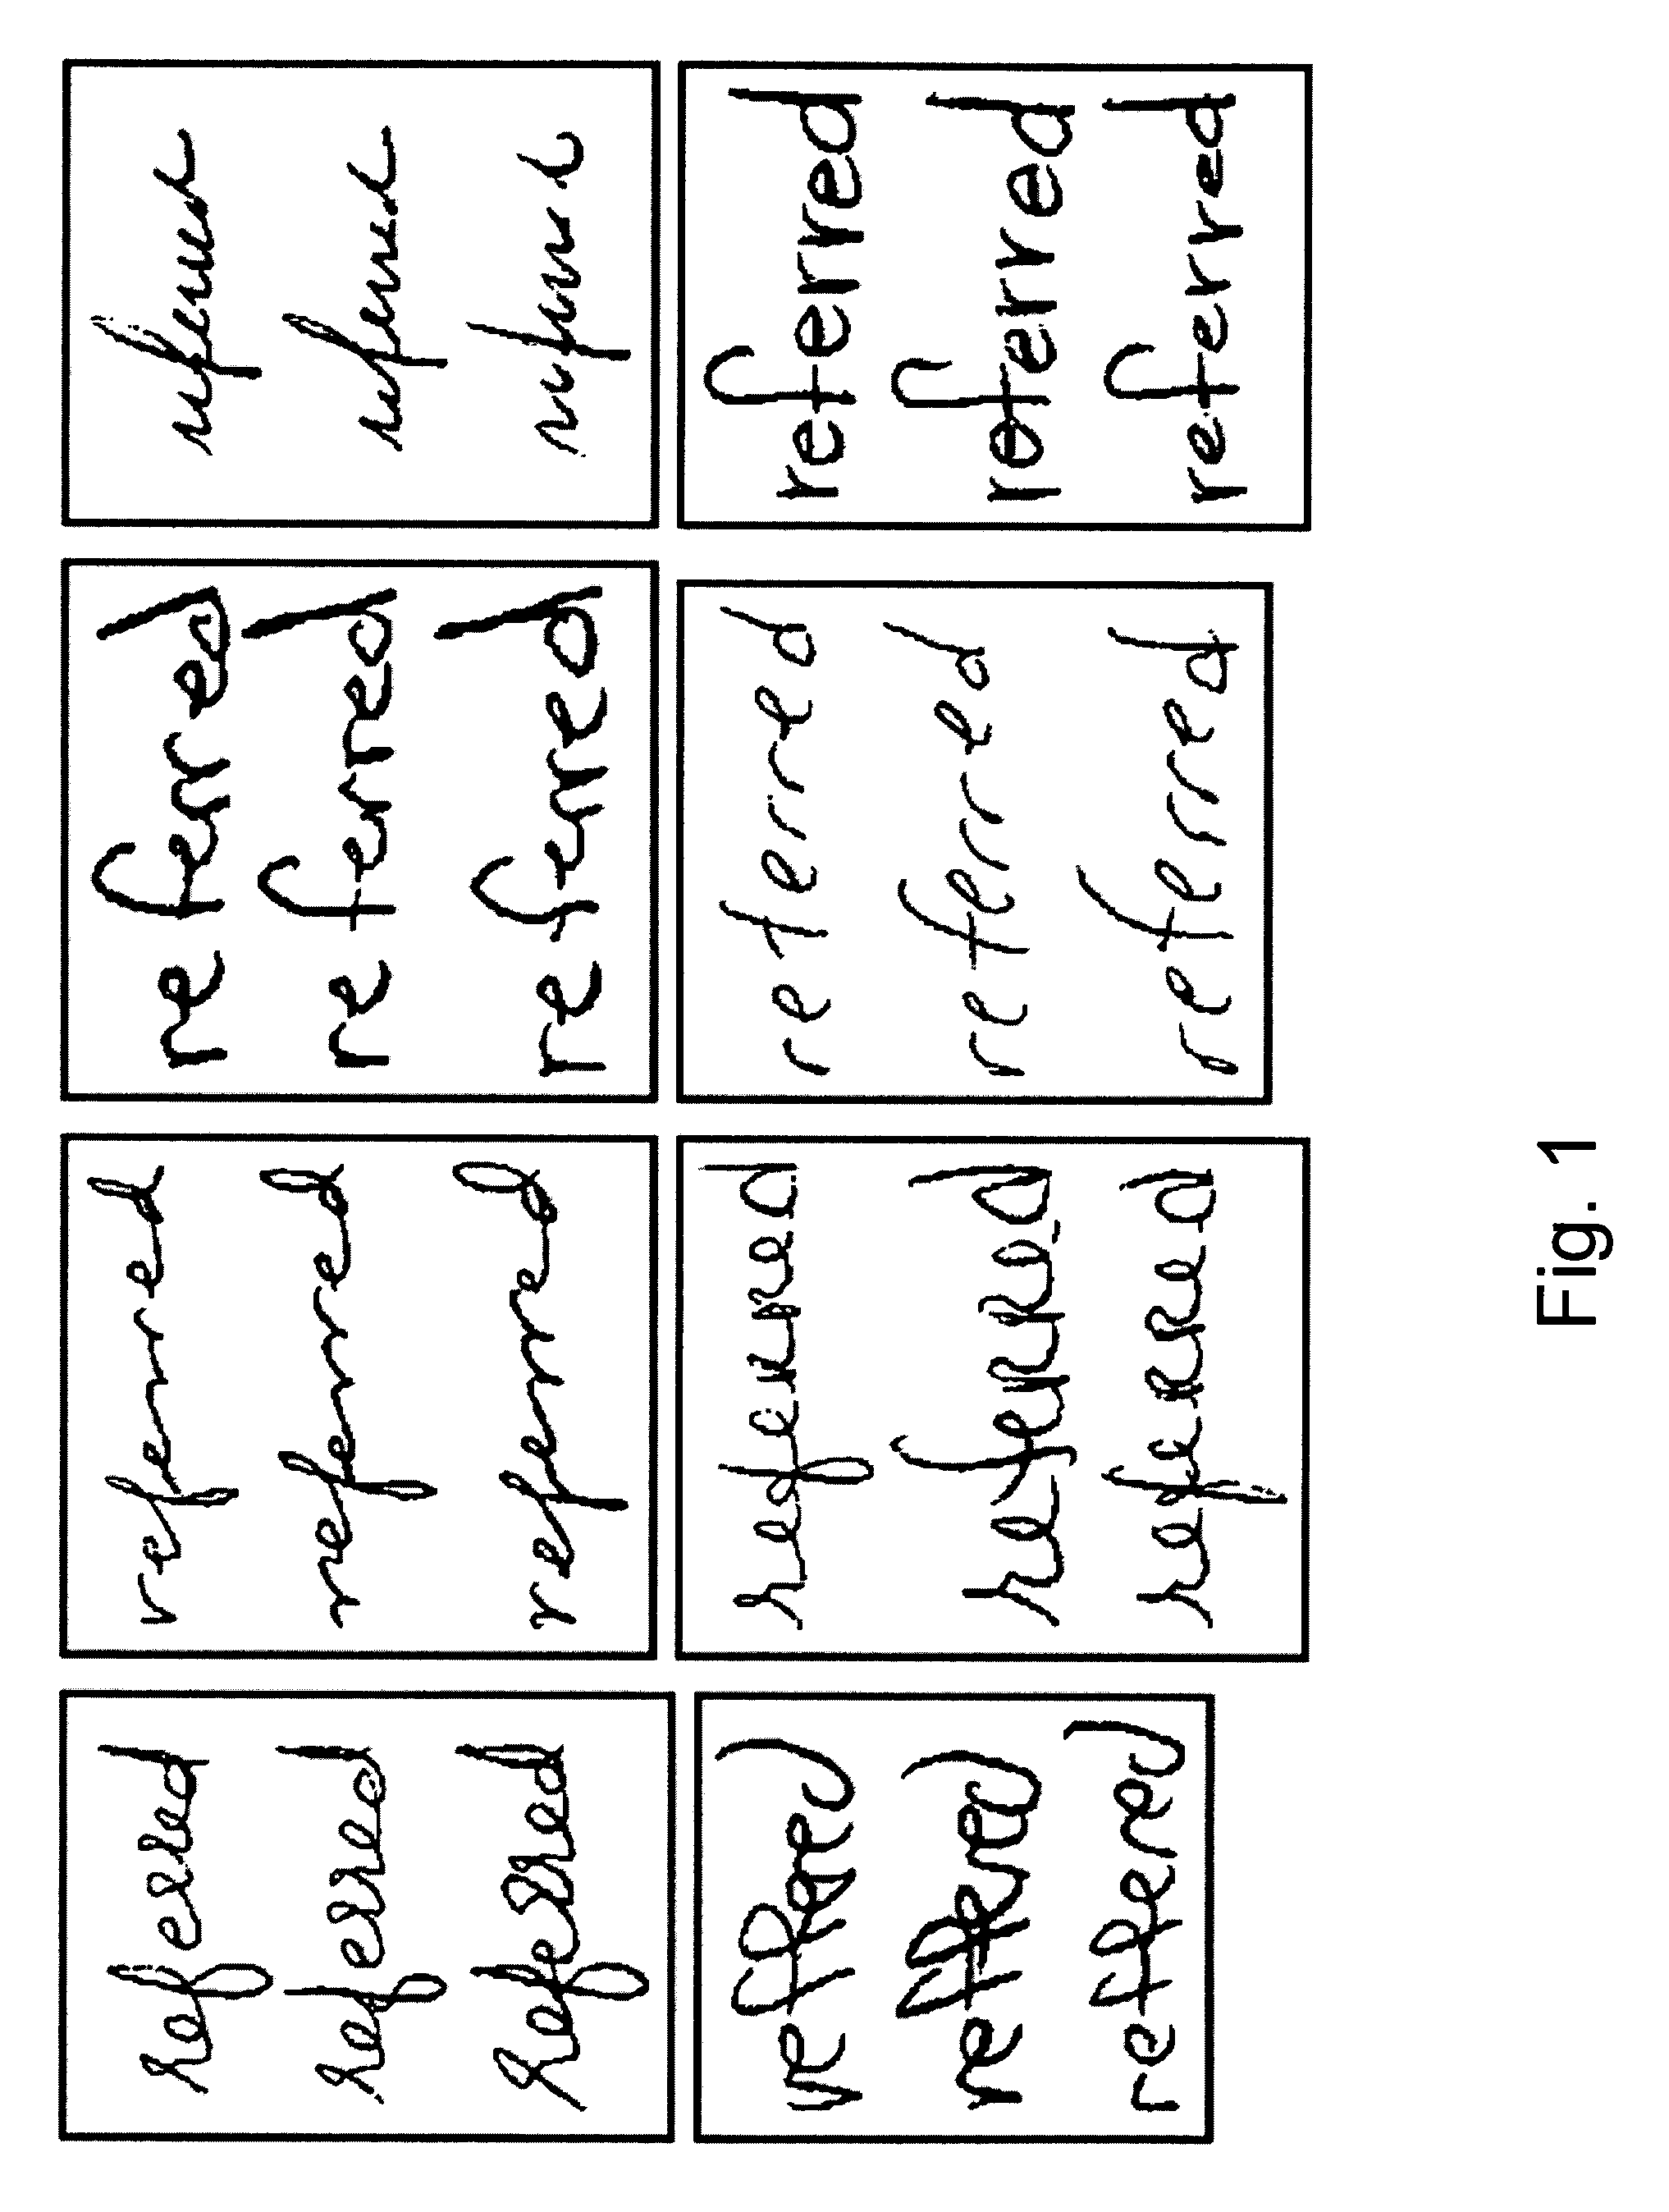 Method and apparatus for analyzing and/or comparing handwritten and/or biometric samples